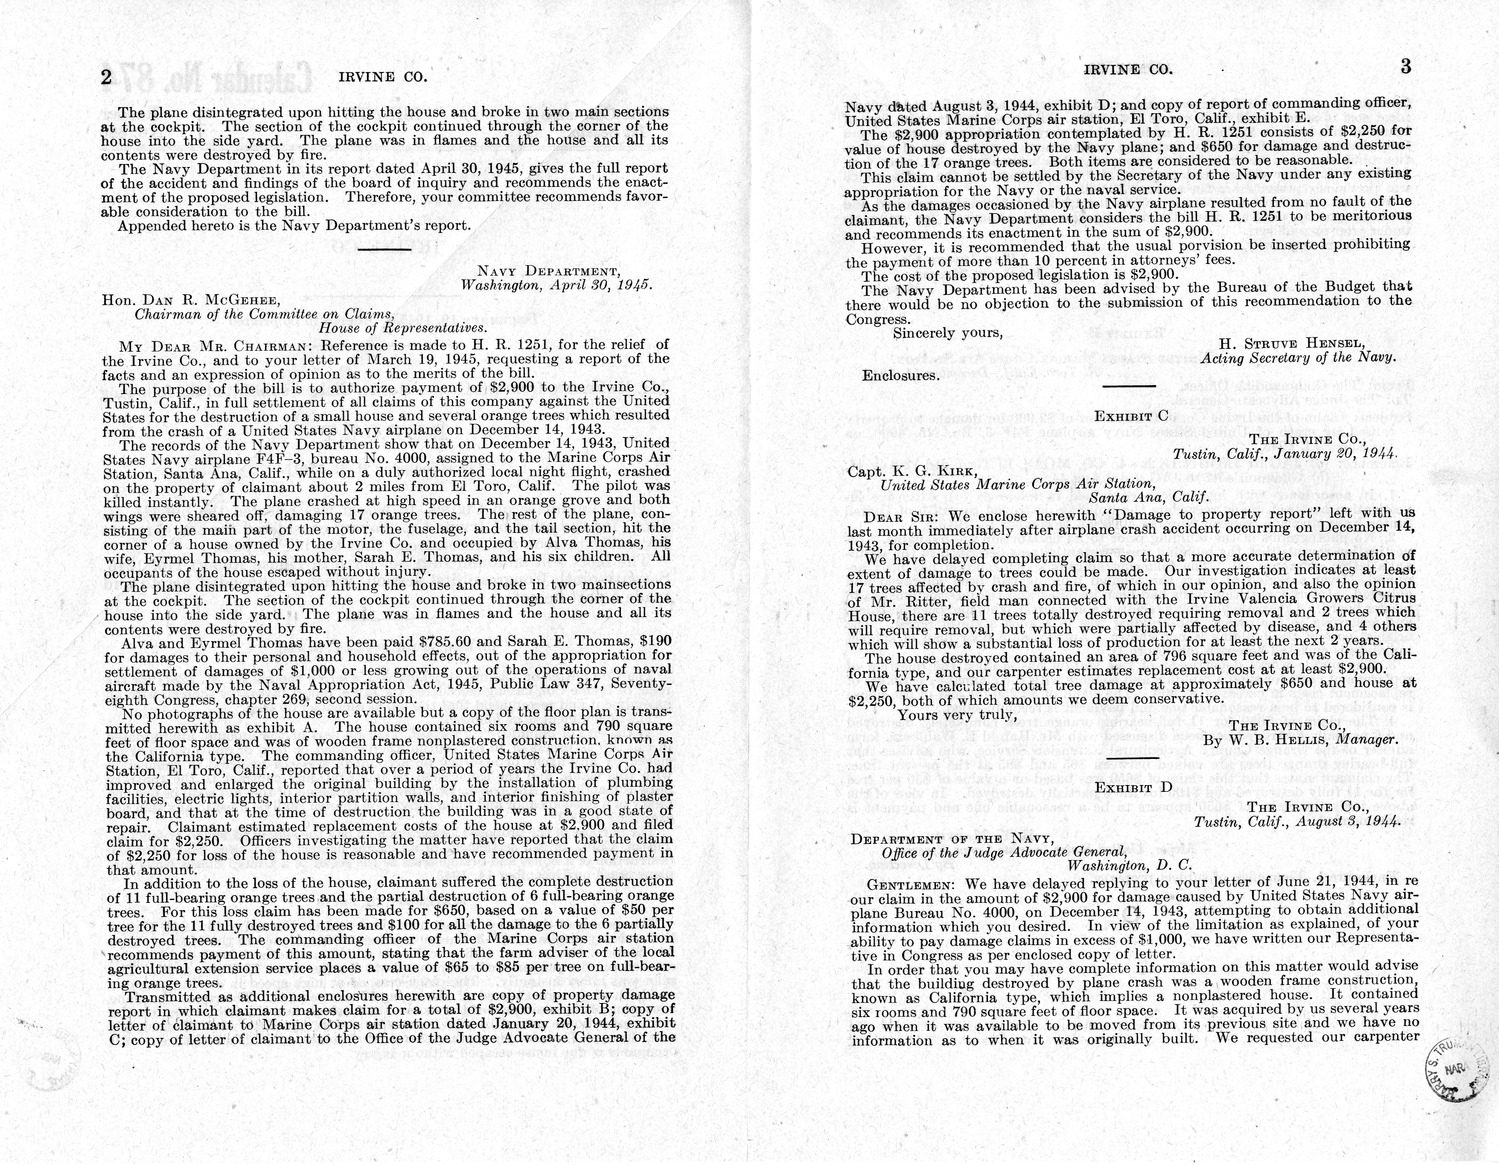 Memorandum from Frederick J. Bailey to M. C. Latta, H.R. 1251, For the Relief of the Irvine Company, with Attachments